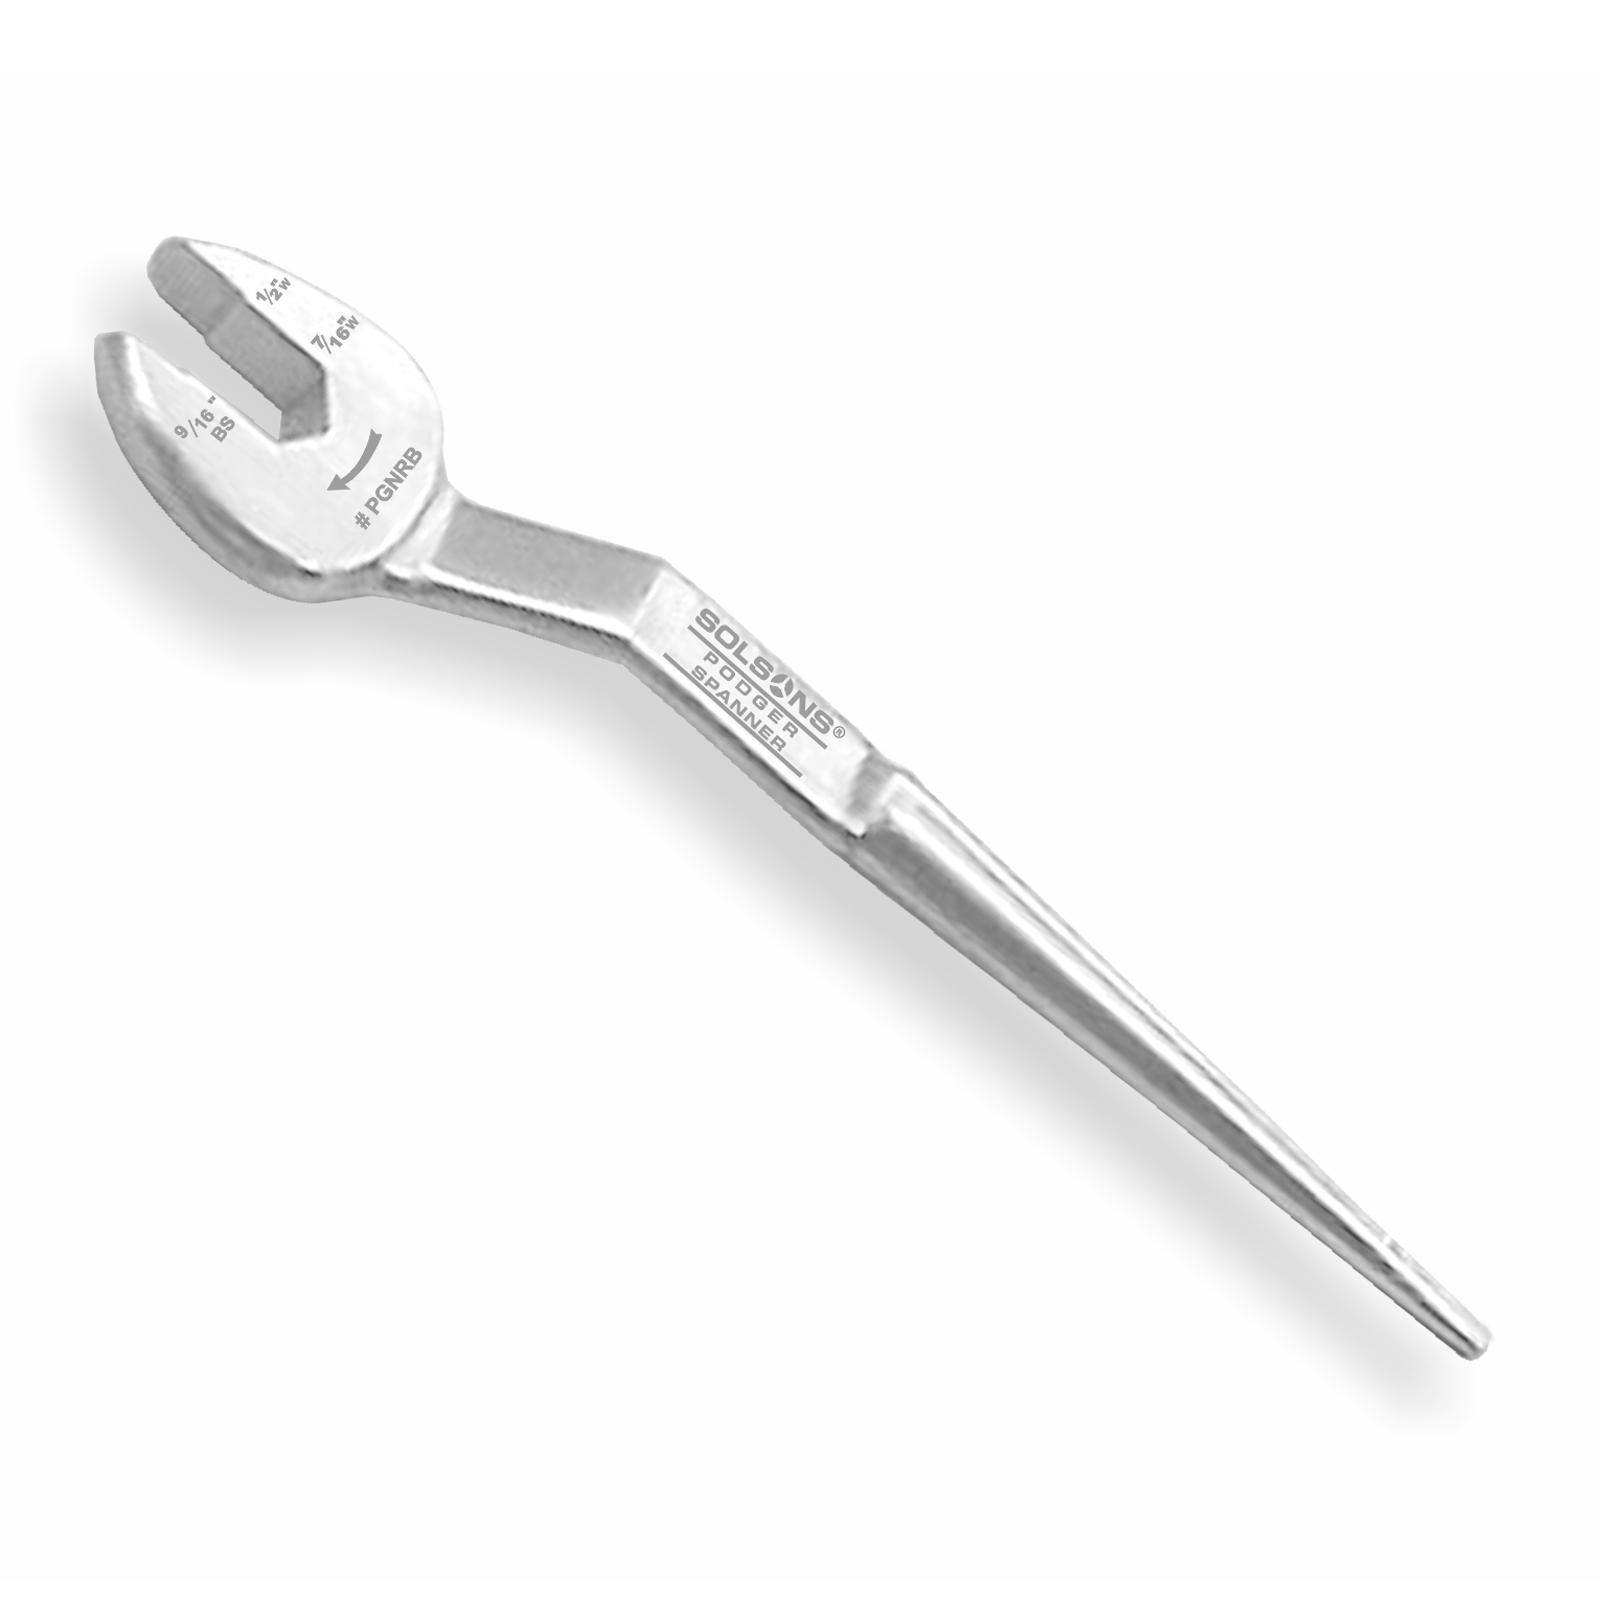 Construction / Scaffolding Wrench – Offset Handle with Non-Ratchet